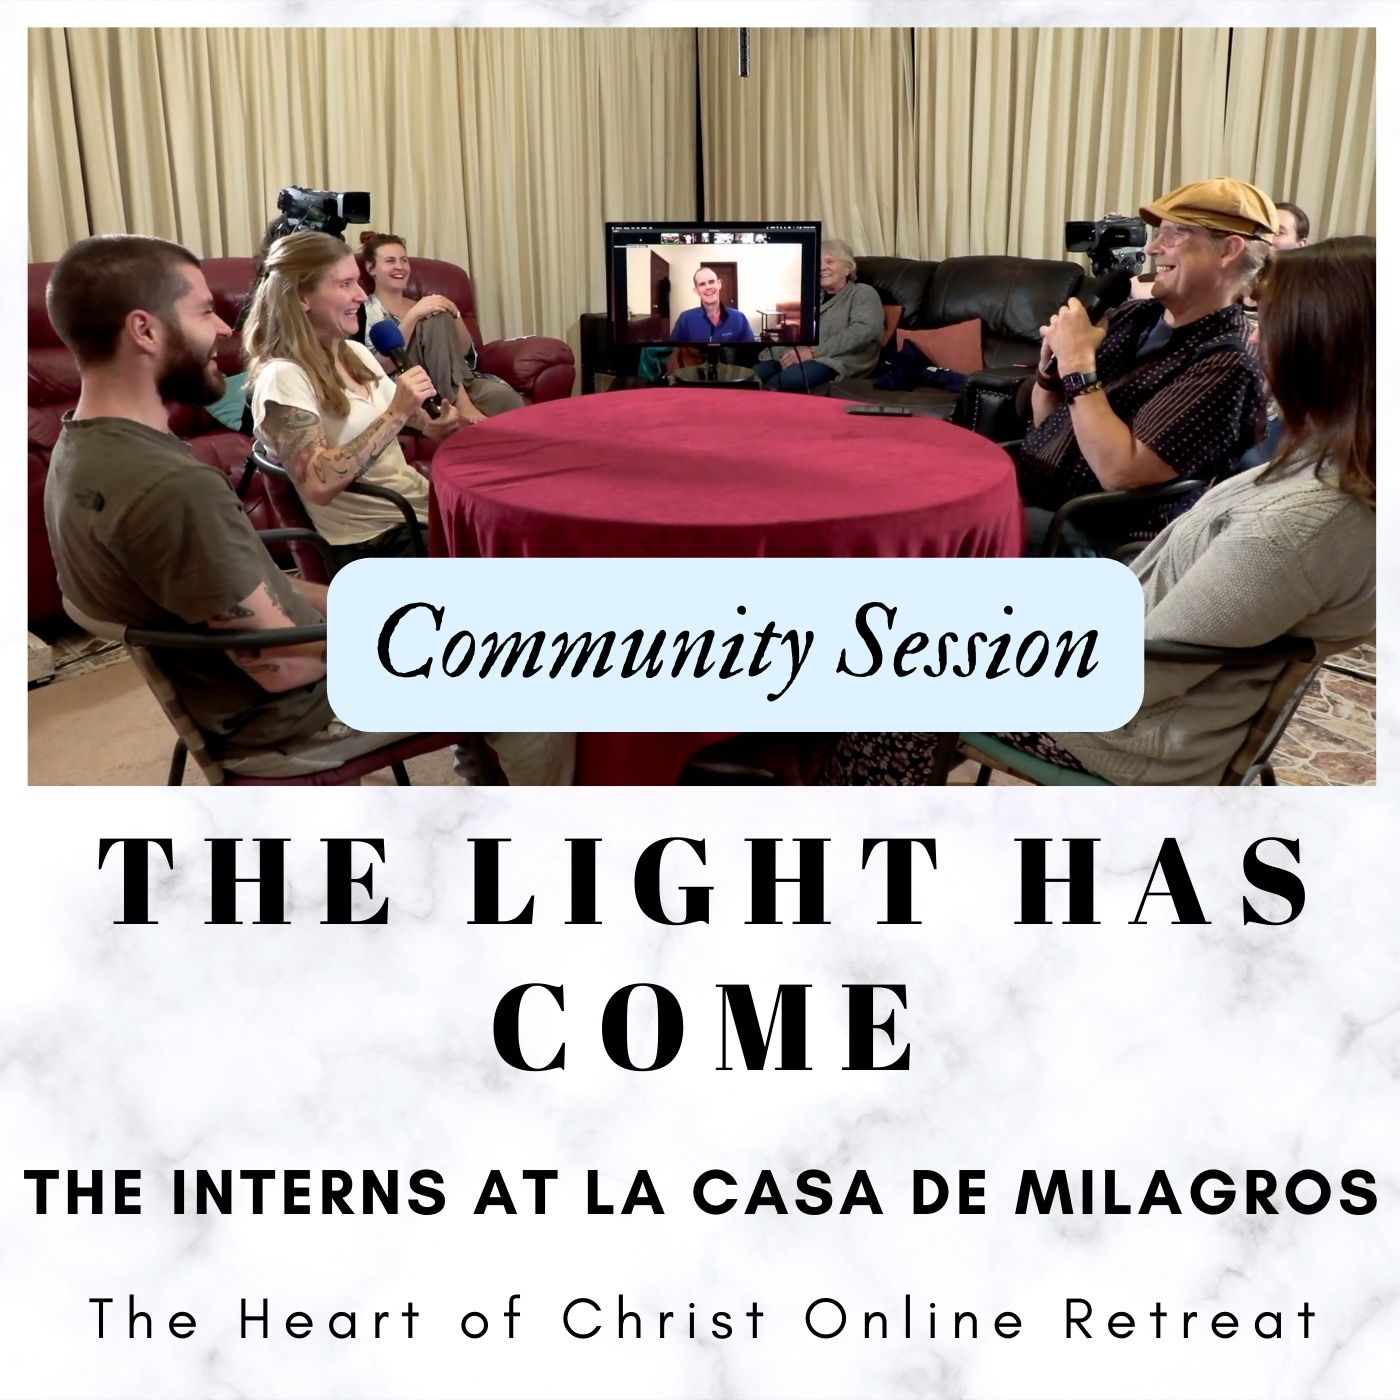 Community Session - "The Light Has Come" Online Retreat with Jason Warwick, Søren Lyngsgaard & The Interns